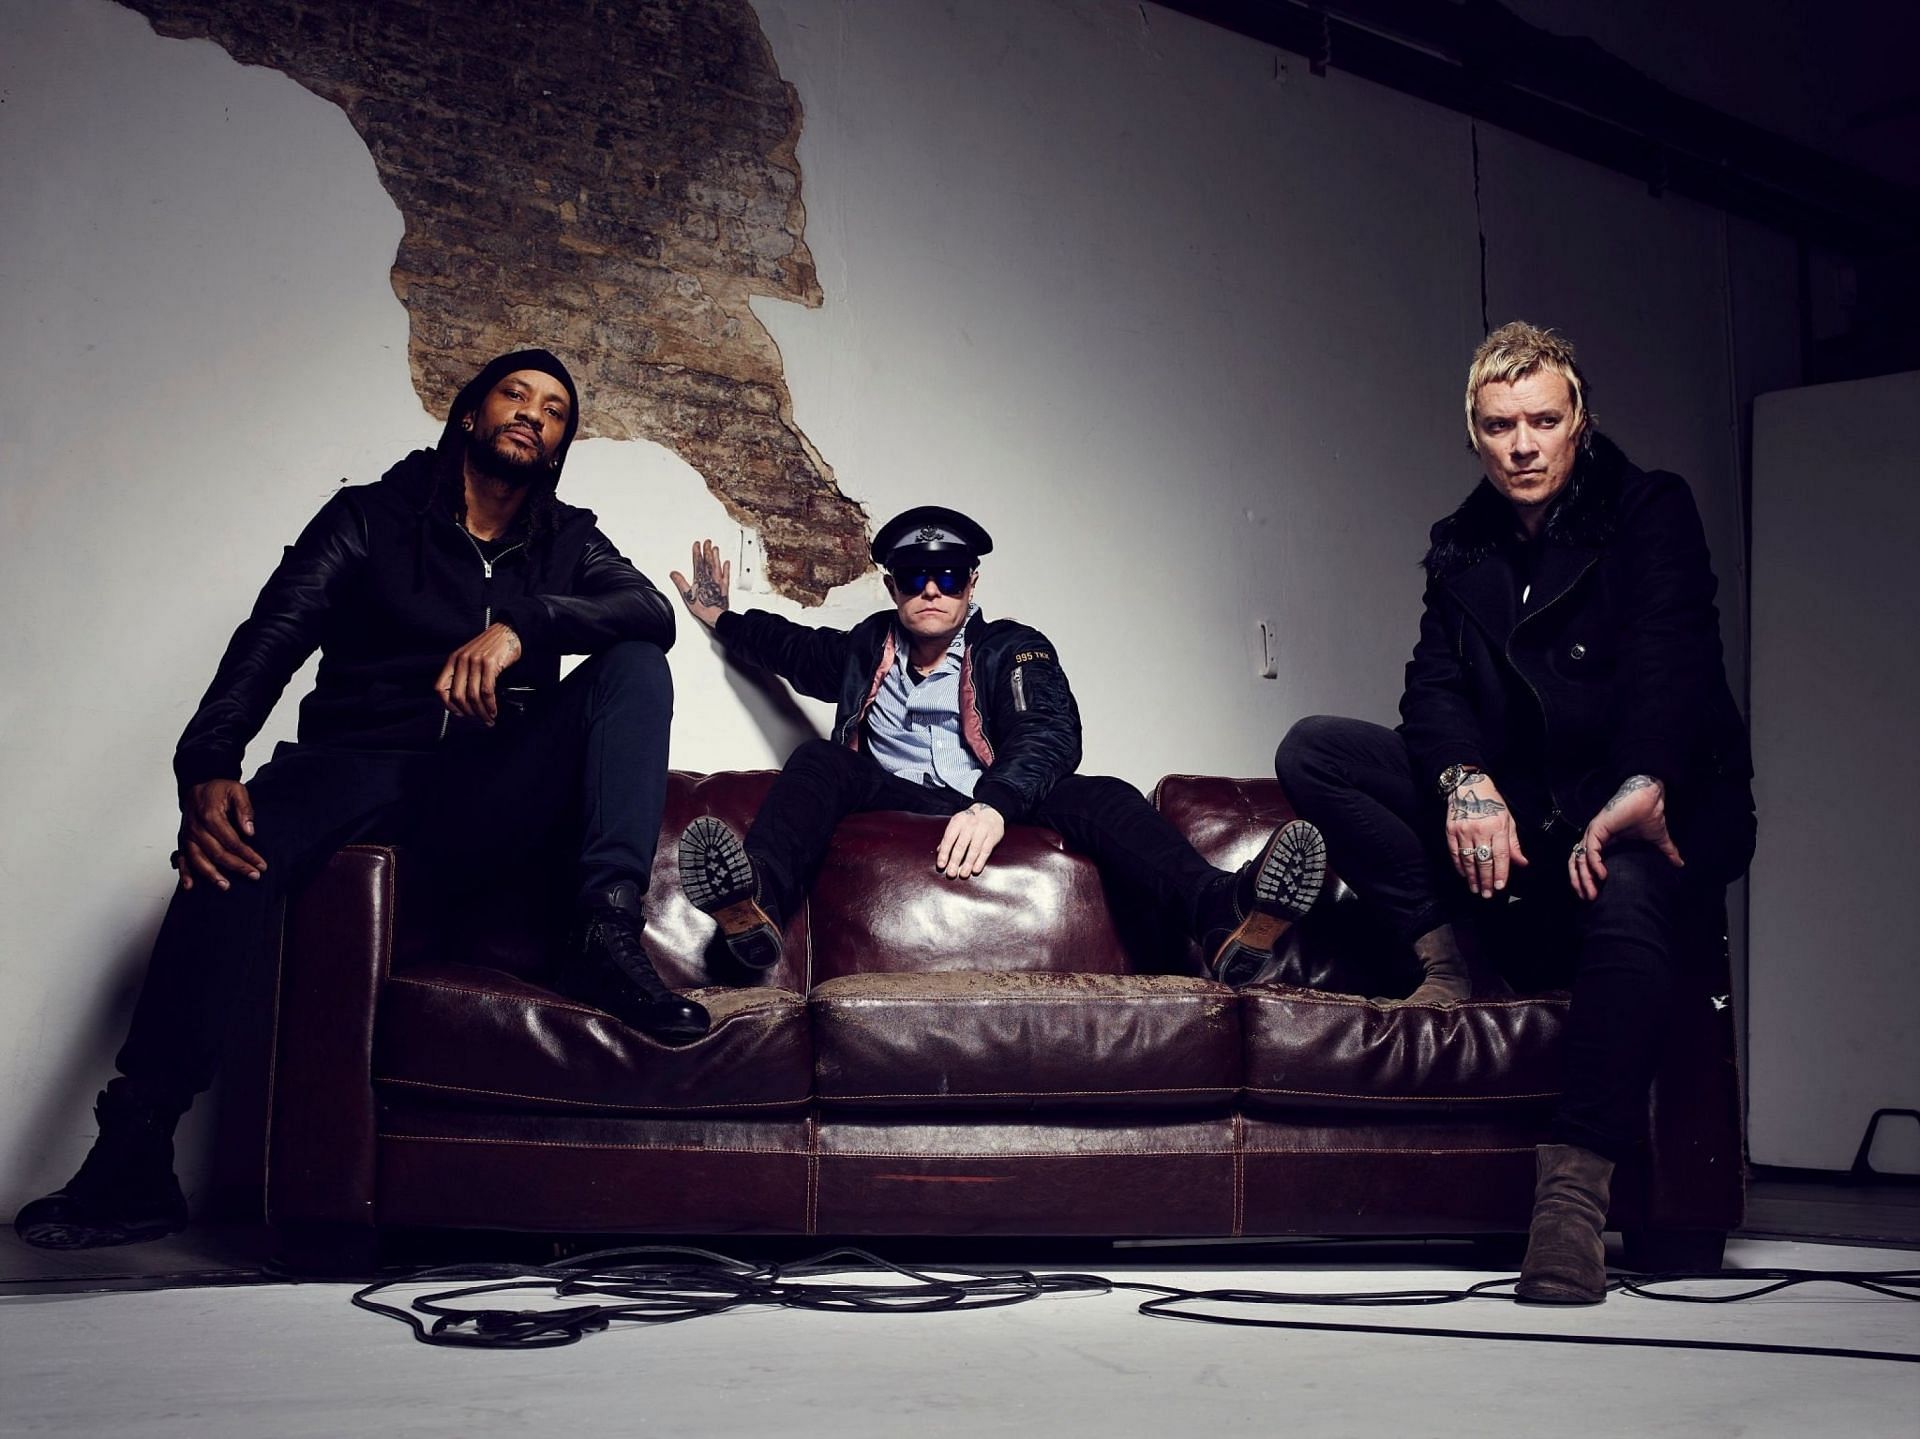 The Prodigy pose for the Q magazine in England on February 24, 2015 (Image via Getty Images)